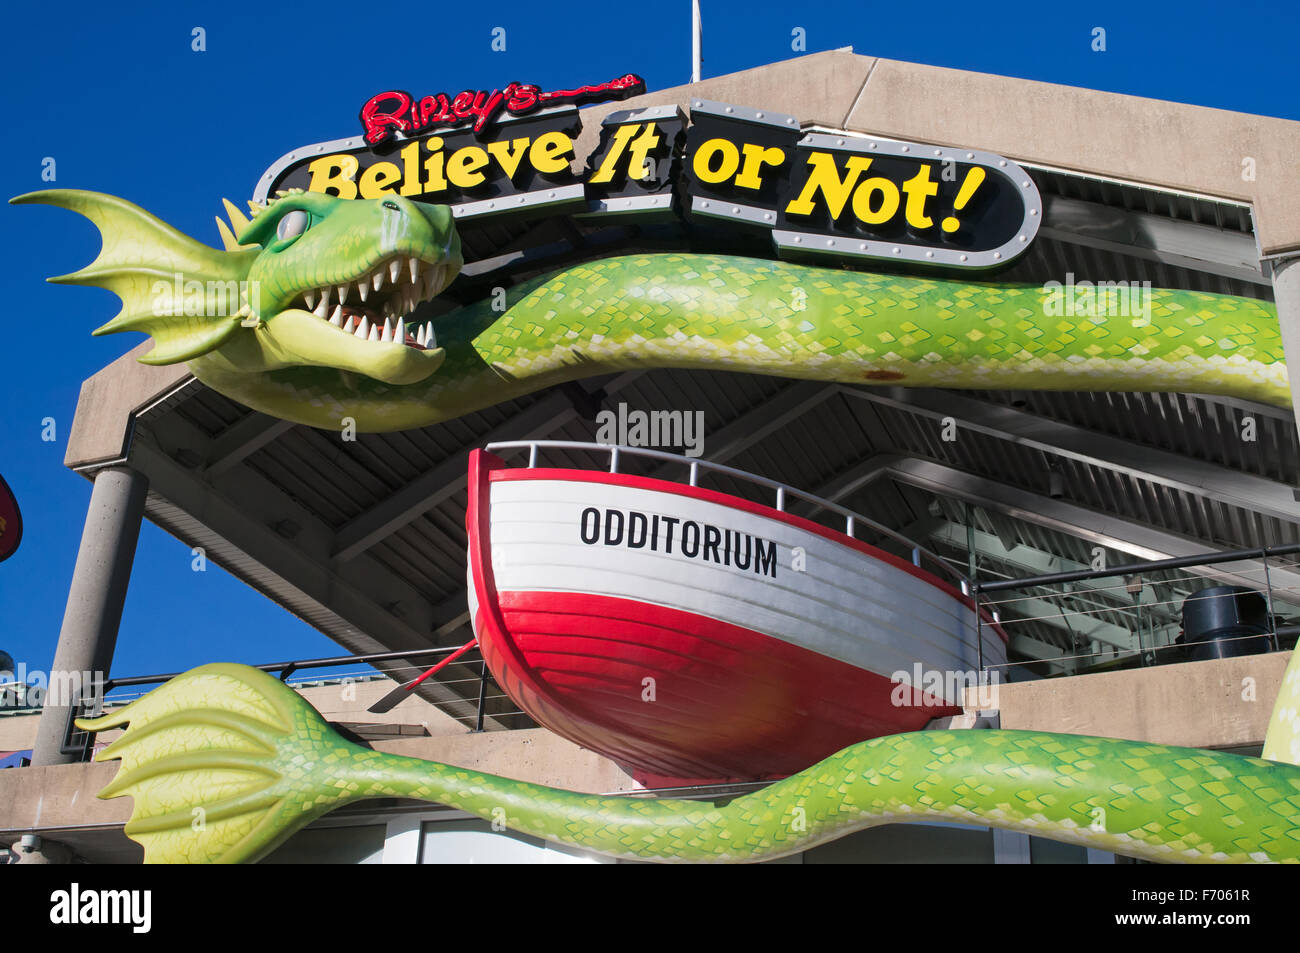 Ripley’s Believe It or Not! Odditorium, Baltimore, Maryland, USA Stock Photo